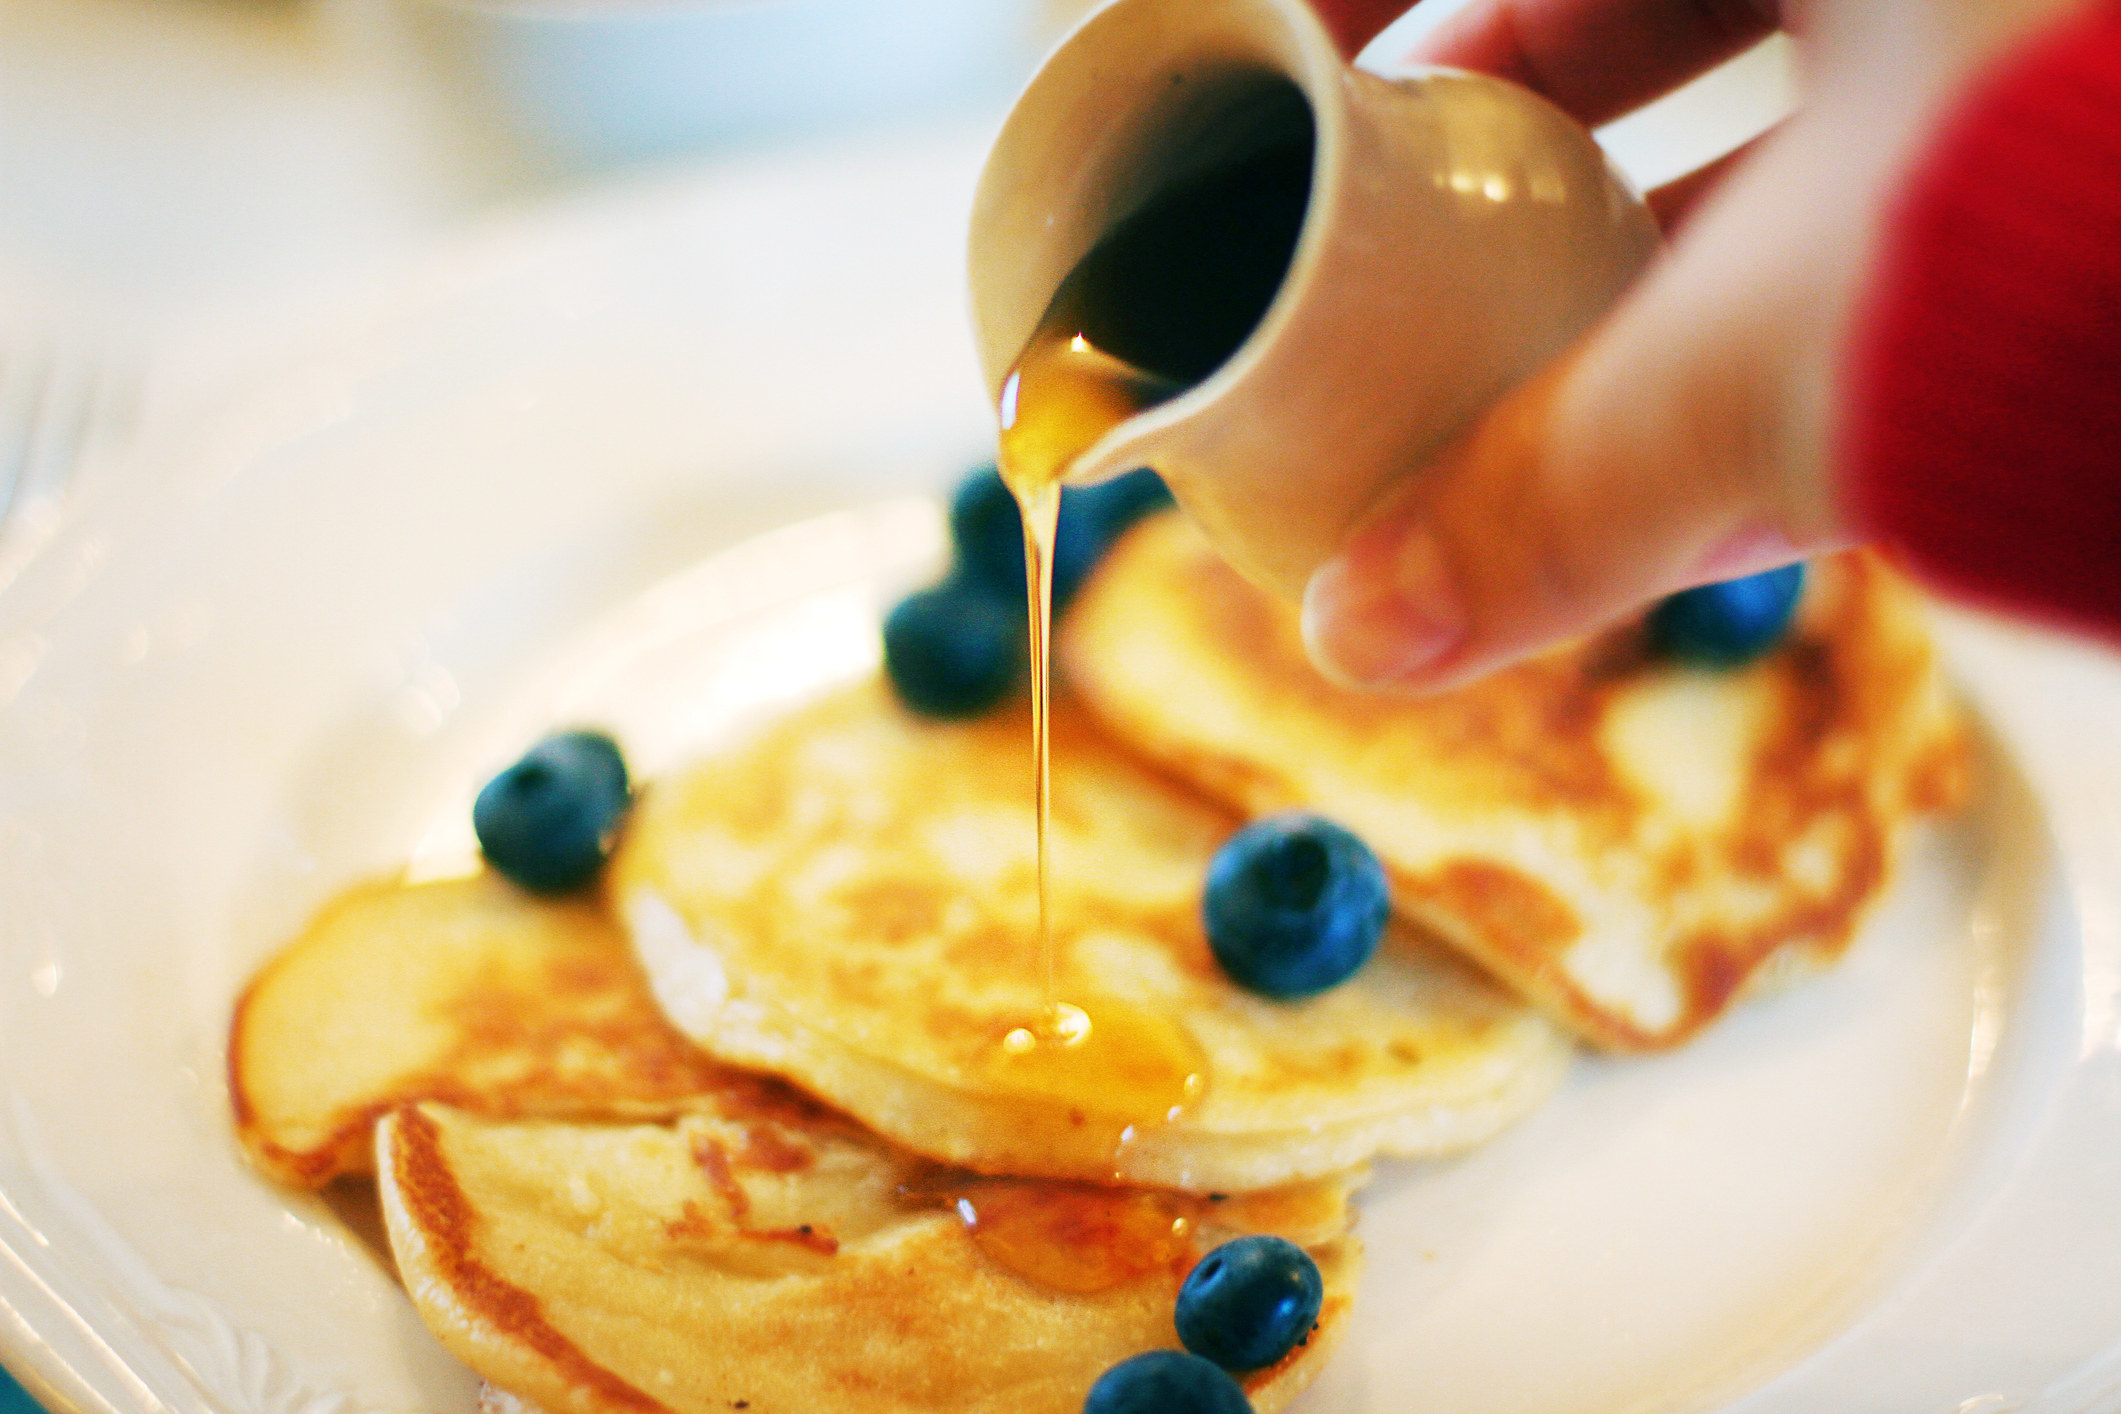 Woman pouring maple syrup over thin pancakes with blueberries.